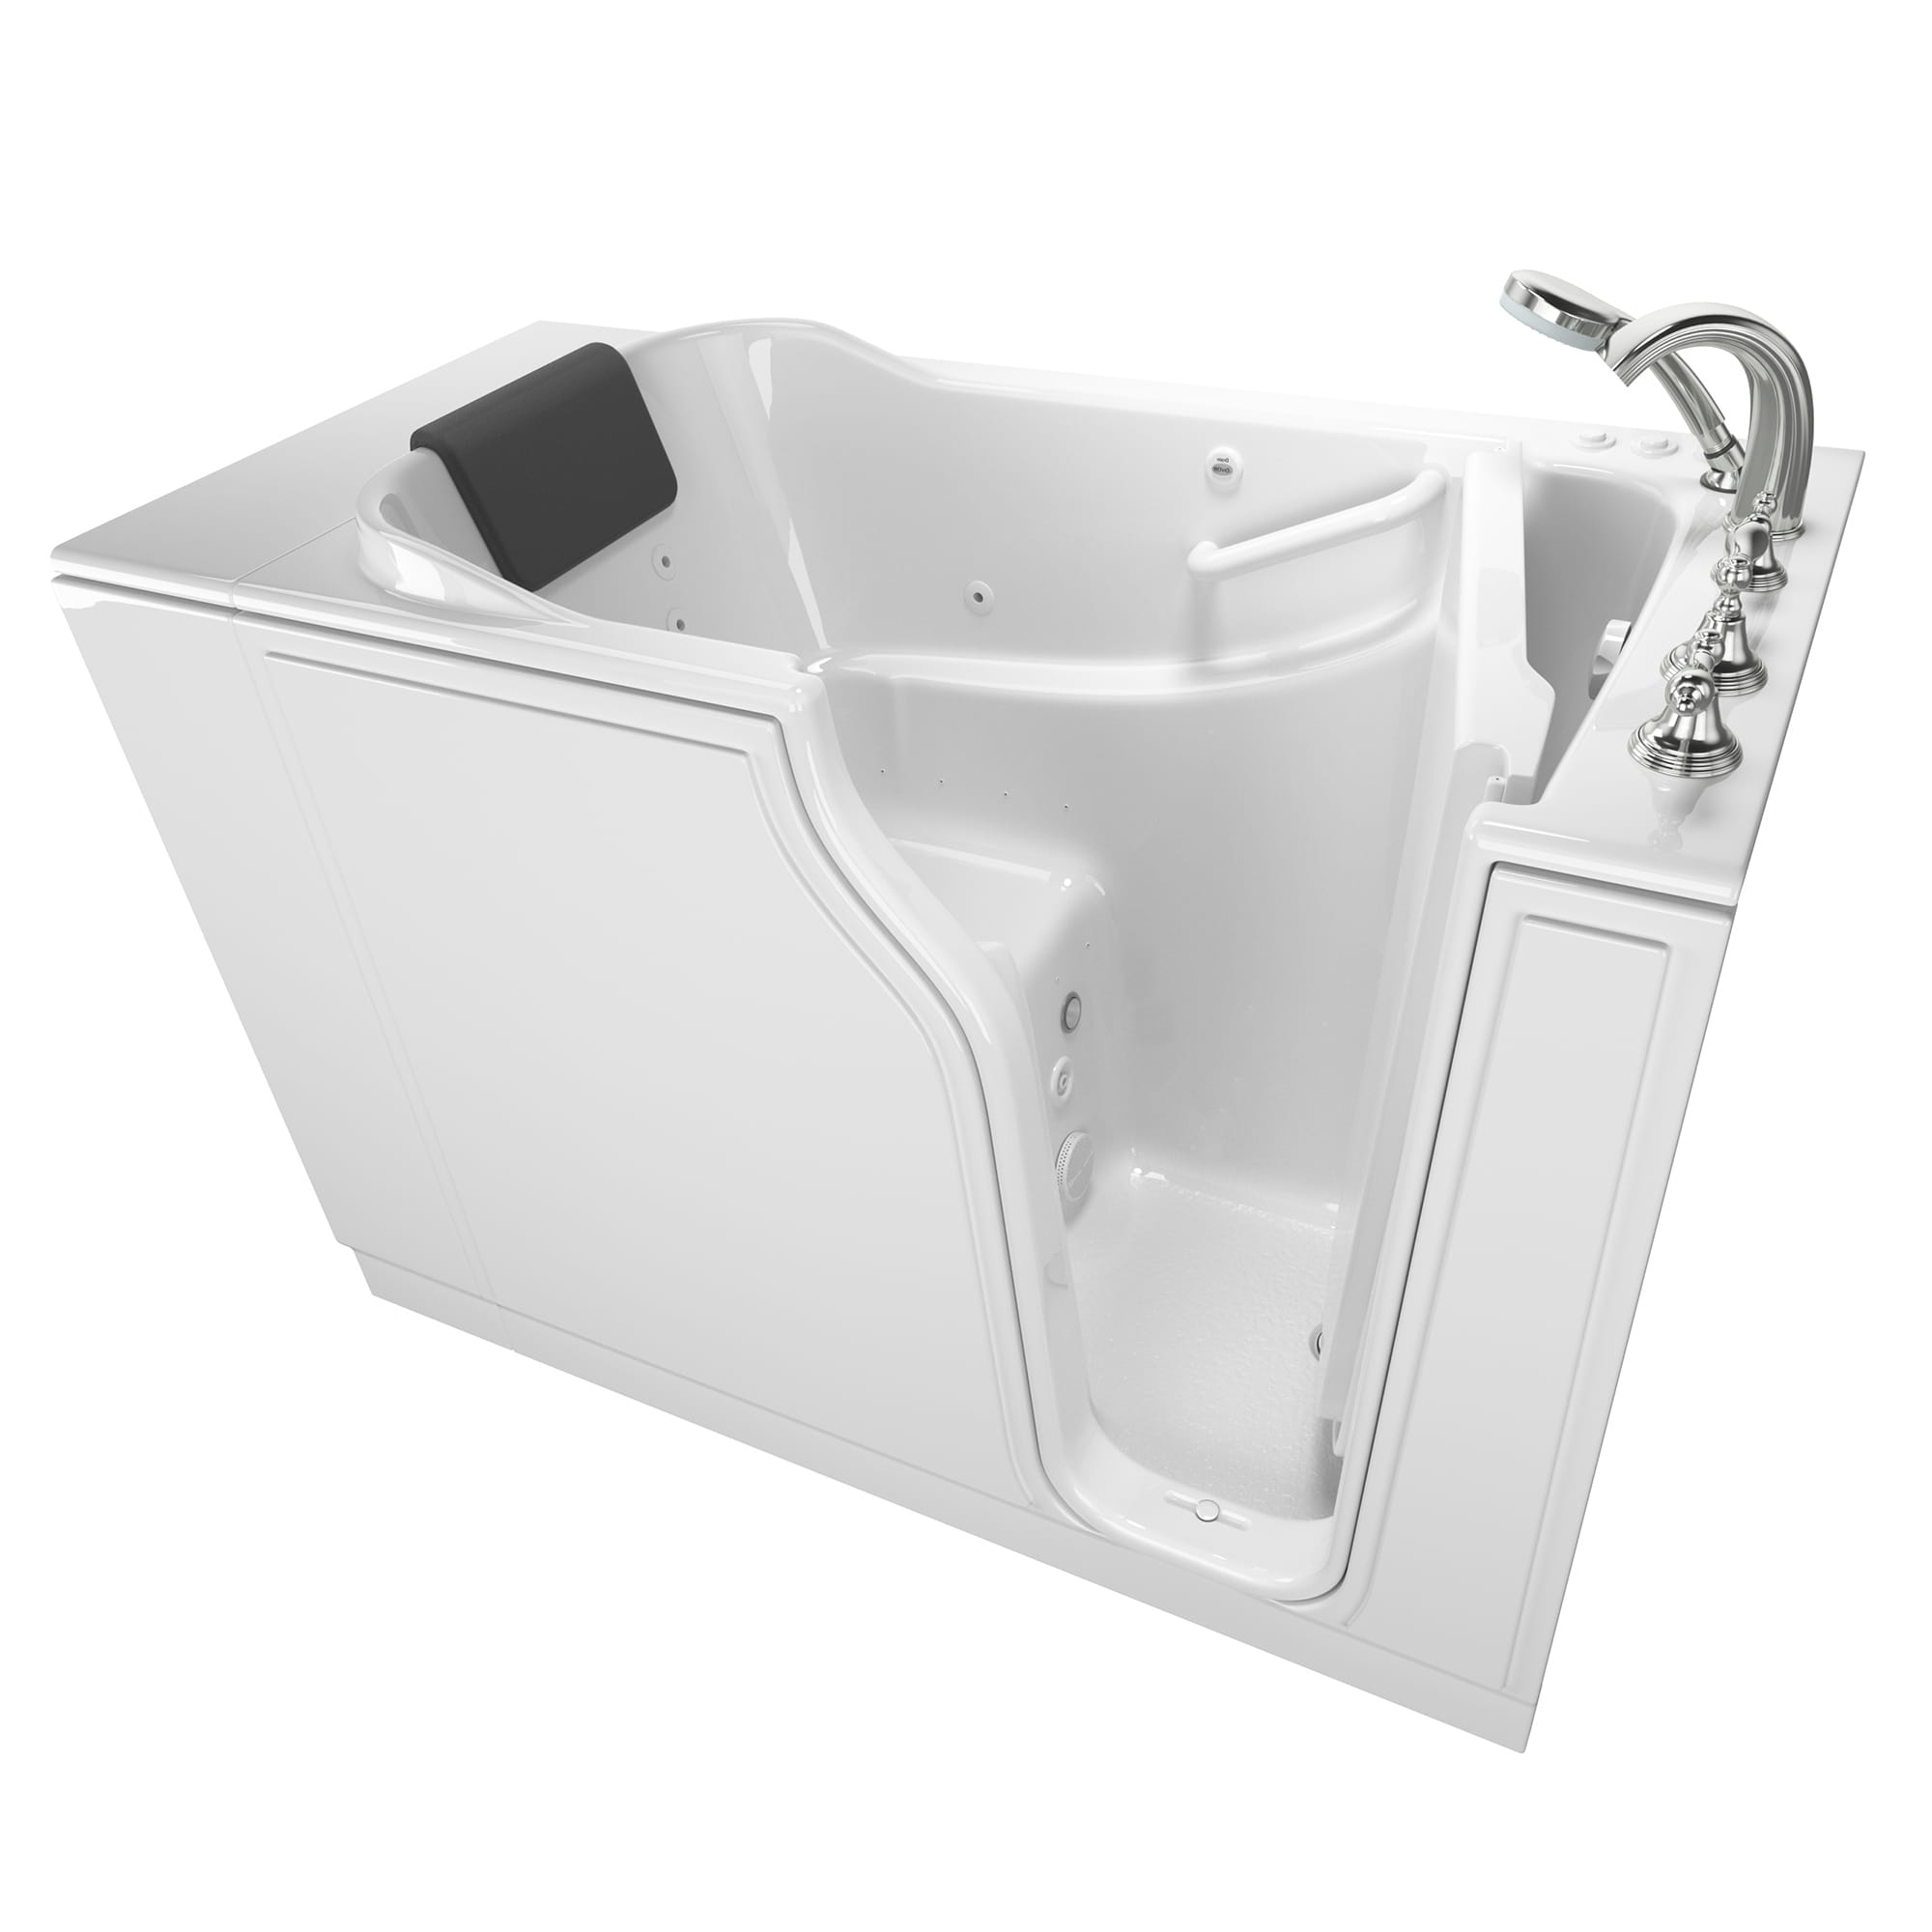 Gelcoat Premium Series 30 x 52  Inch Walk in Tub With Combination Air Spa and Whirlpool Systems   Right Hand Drain With Faucet WIB WHITE